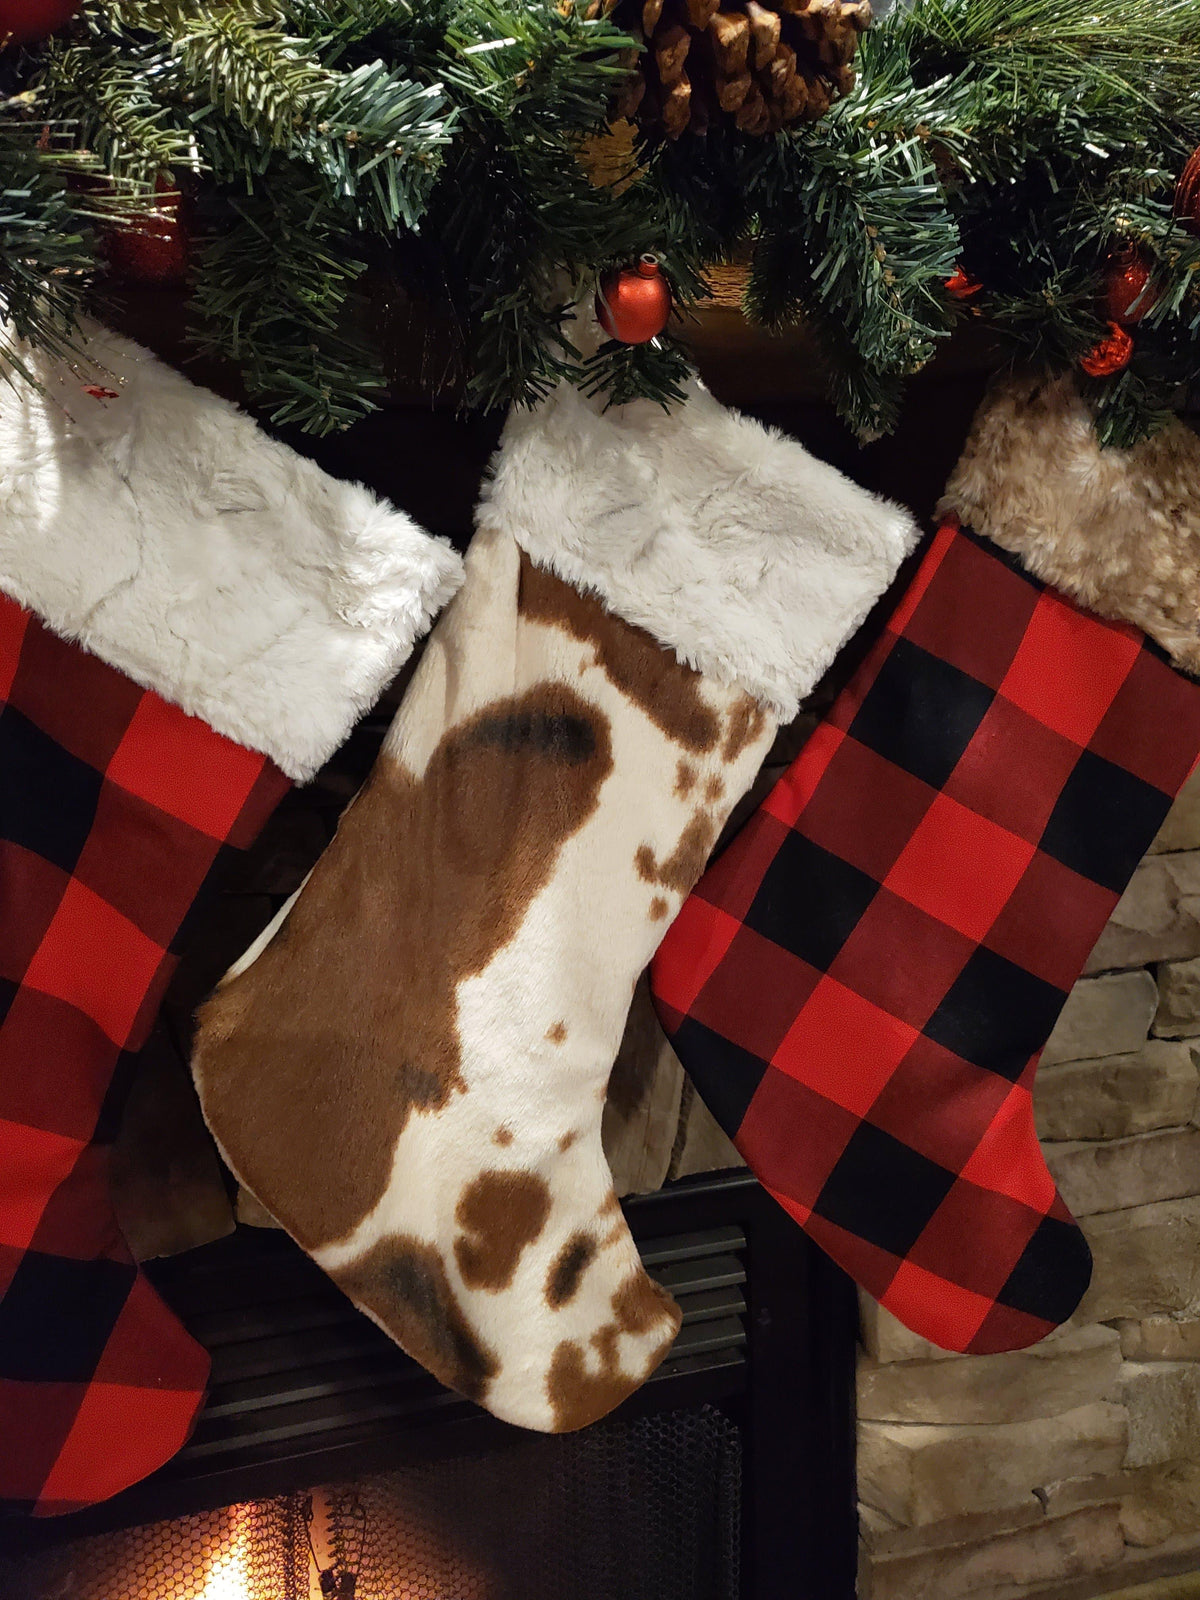 Holiday Decor - Christmas Stocking - Red Black Check, Cow Minky, and Fawn Minky Collection - DBC Baby Bedding Co 